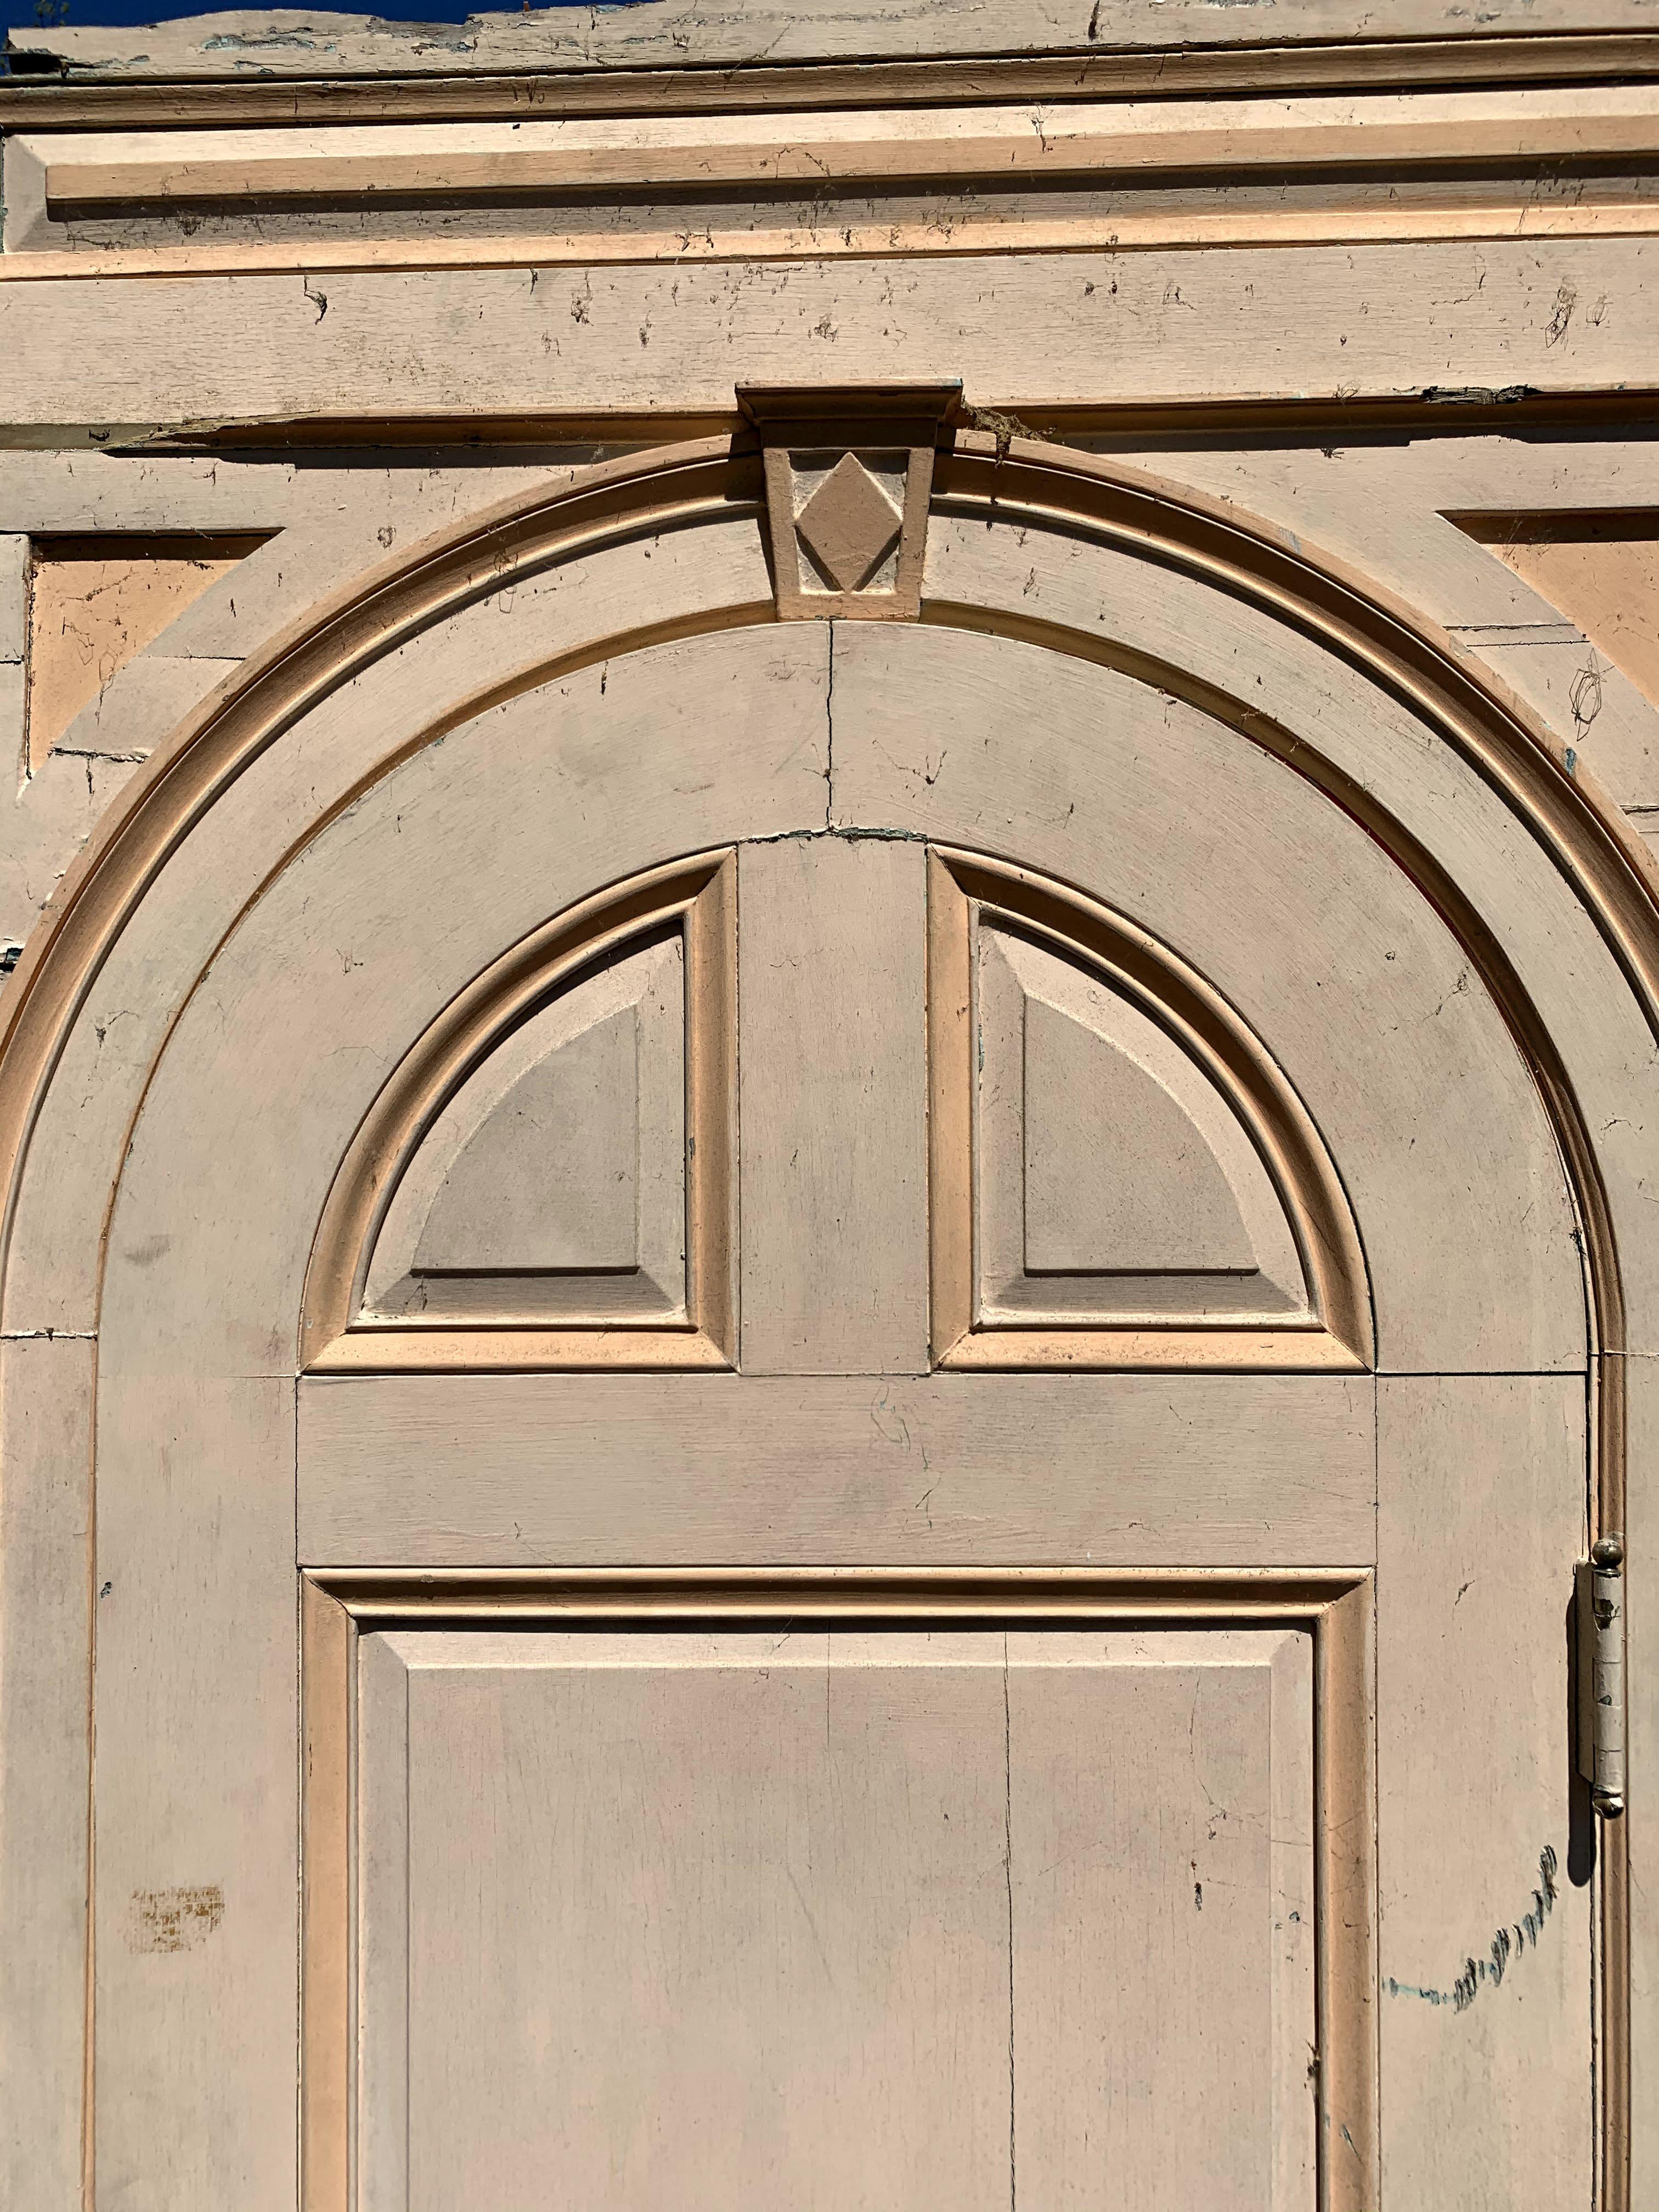 American Pair of 19th Century Paneled Arched Top Doors from Manchester by the Sea, MA